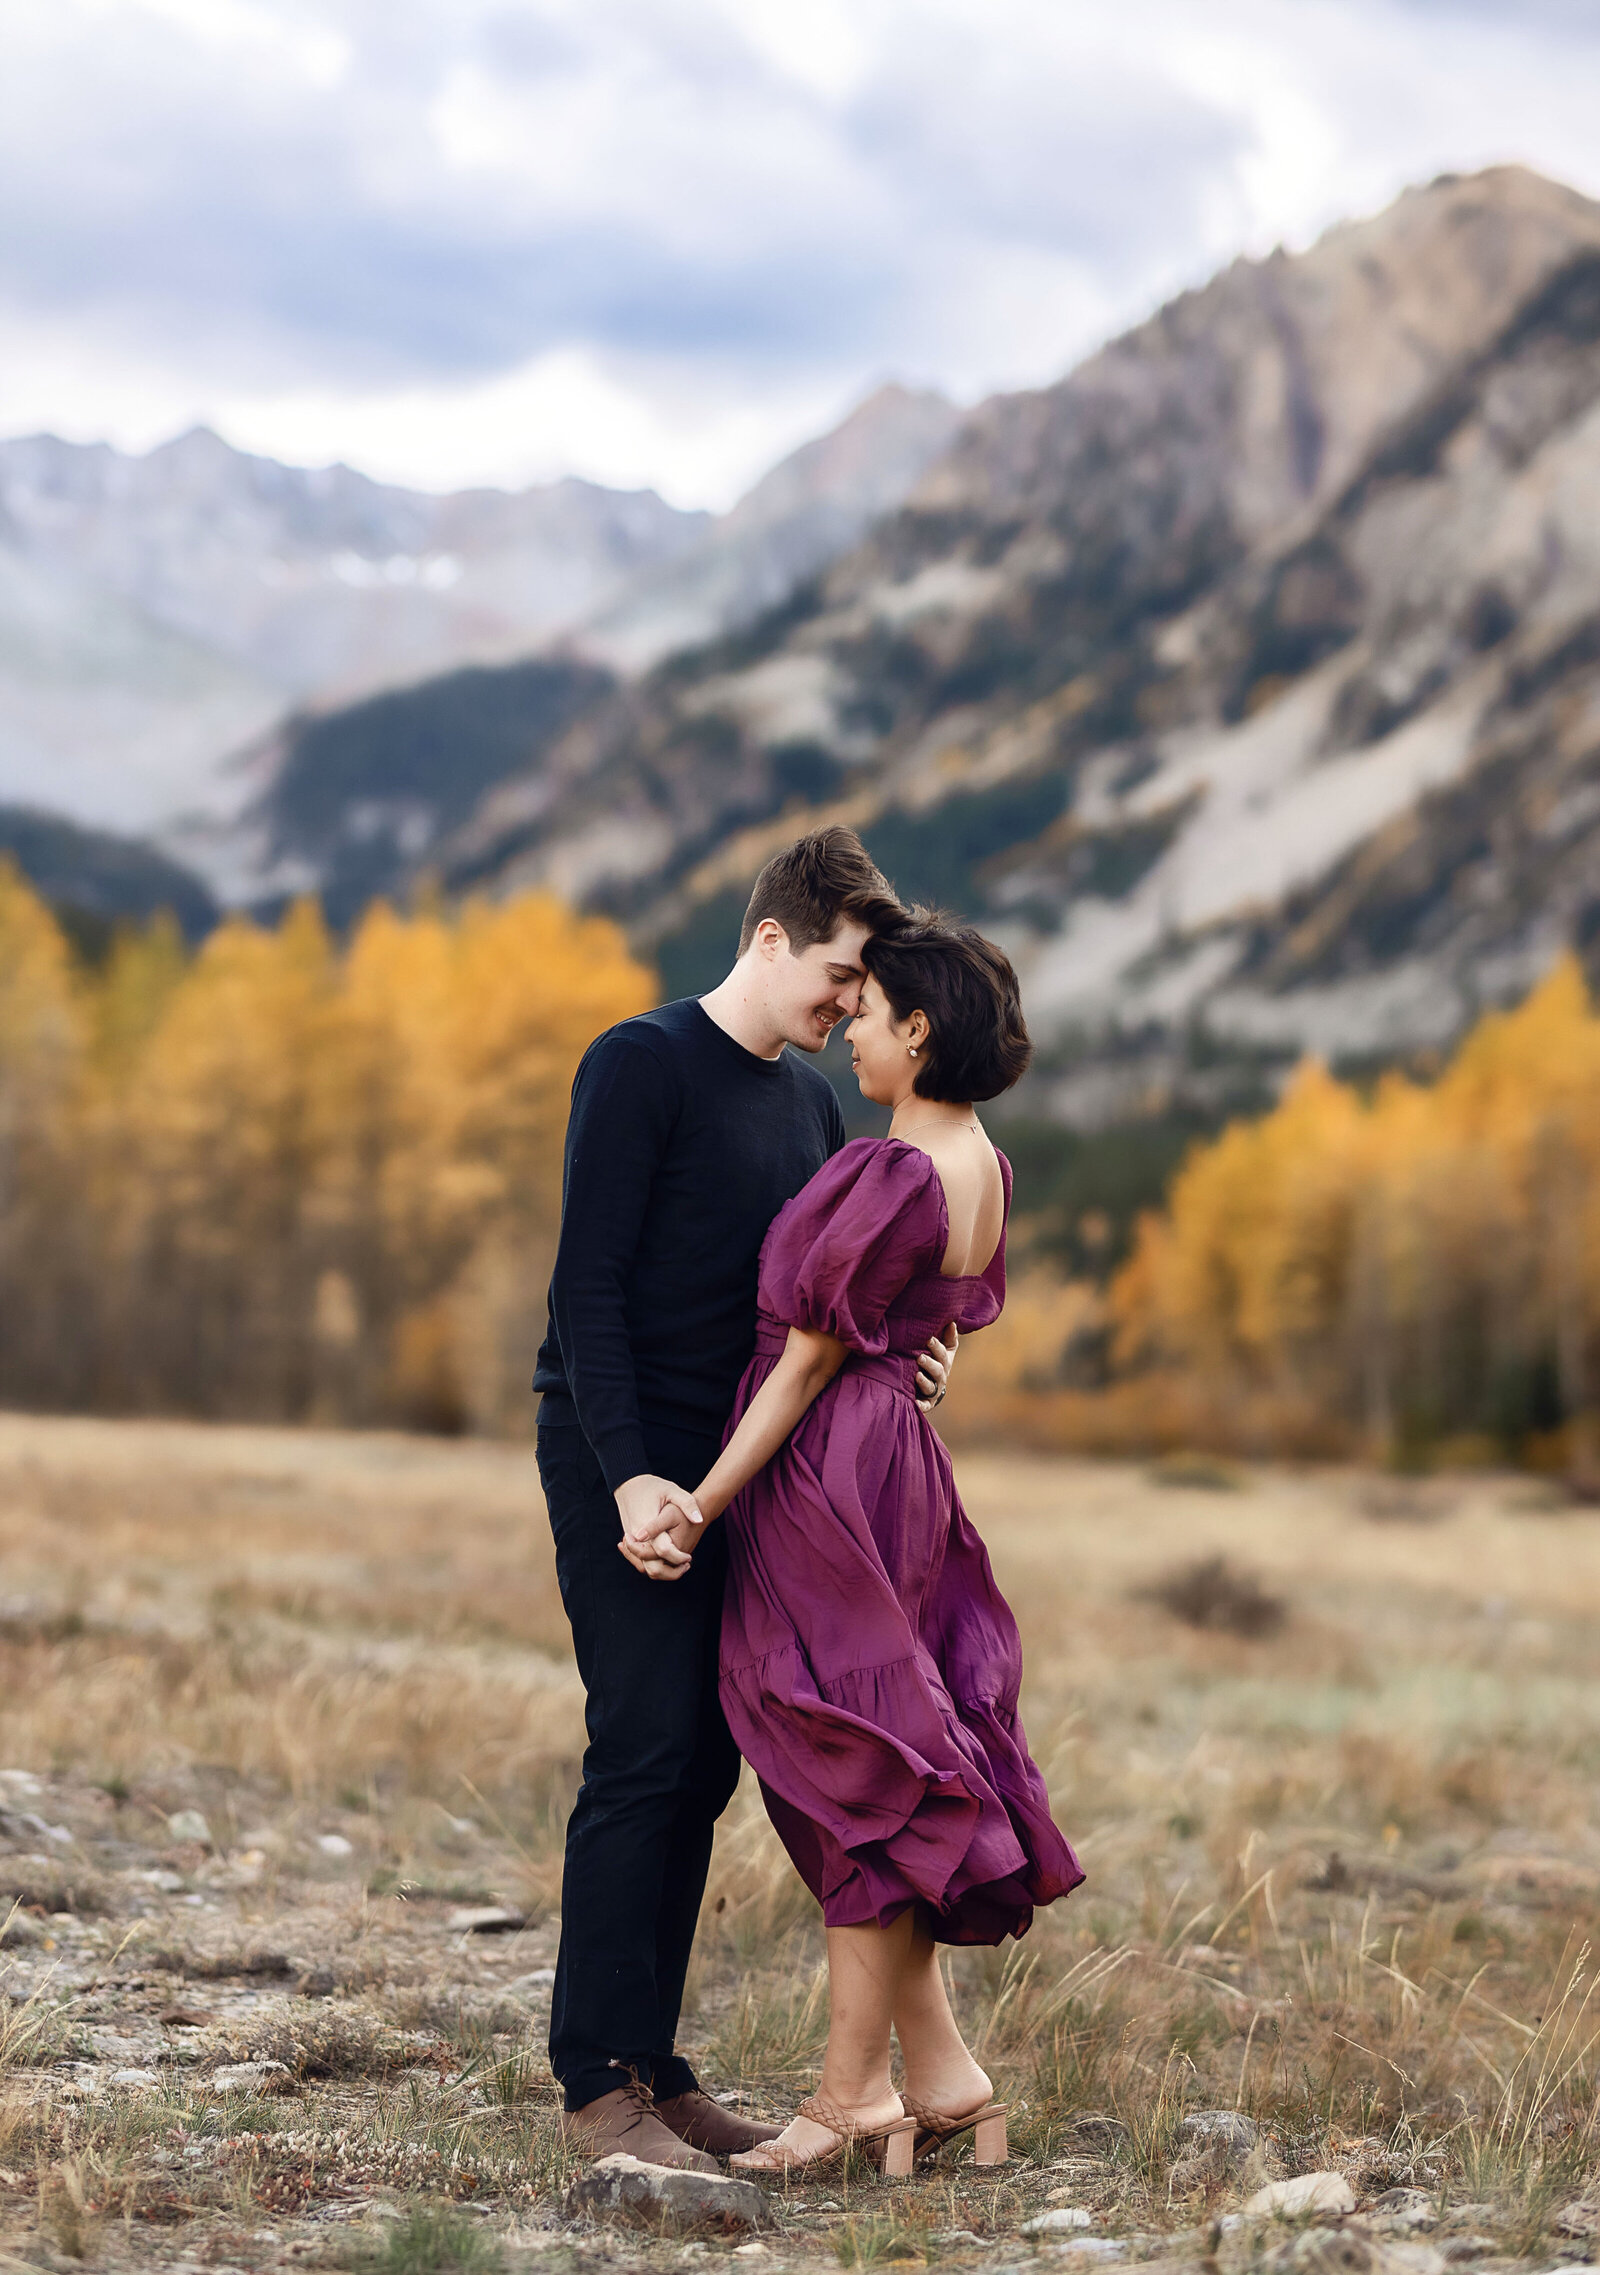 A young woman and young man hold hands and embrace during their engagement photoshoot in Aspen, Colorado,